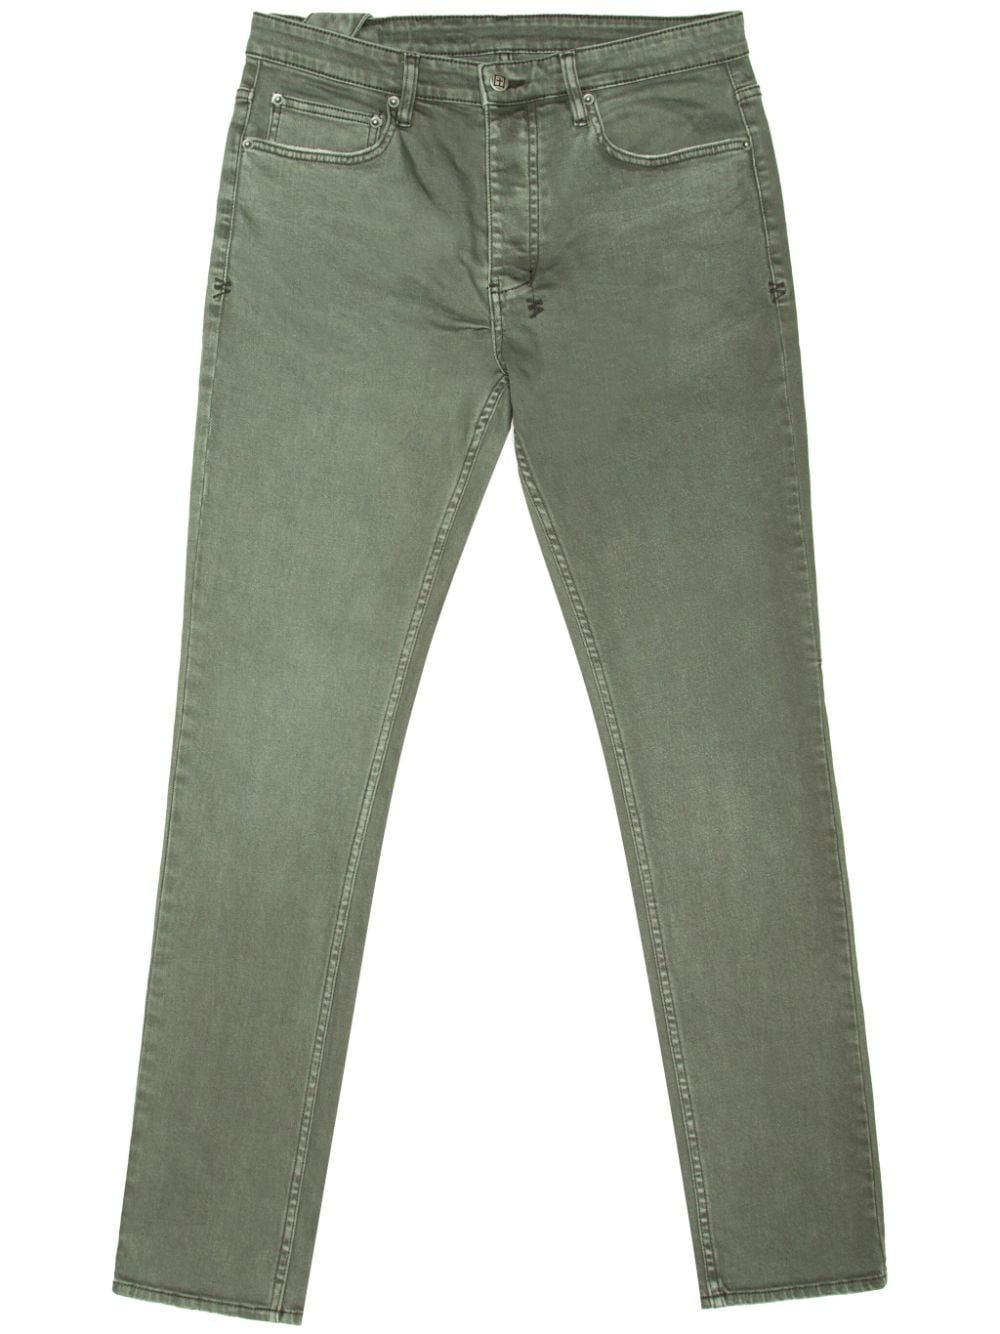 Chitch Surplus mid-rise slim-tapered jeans